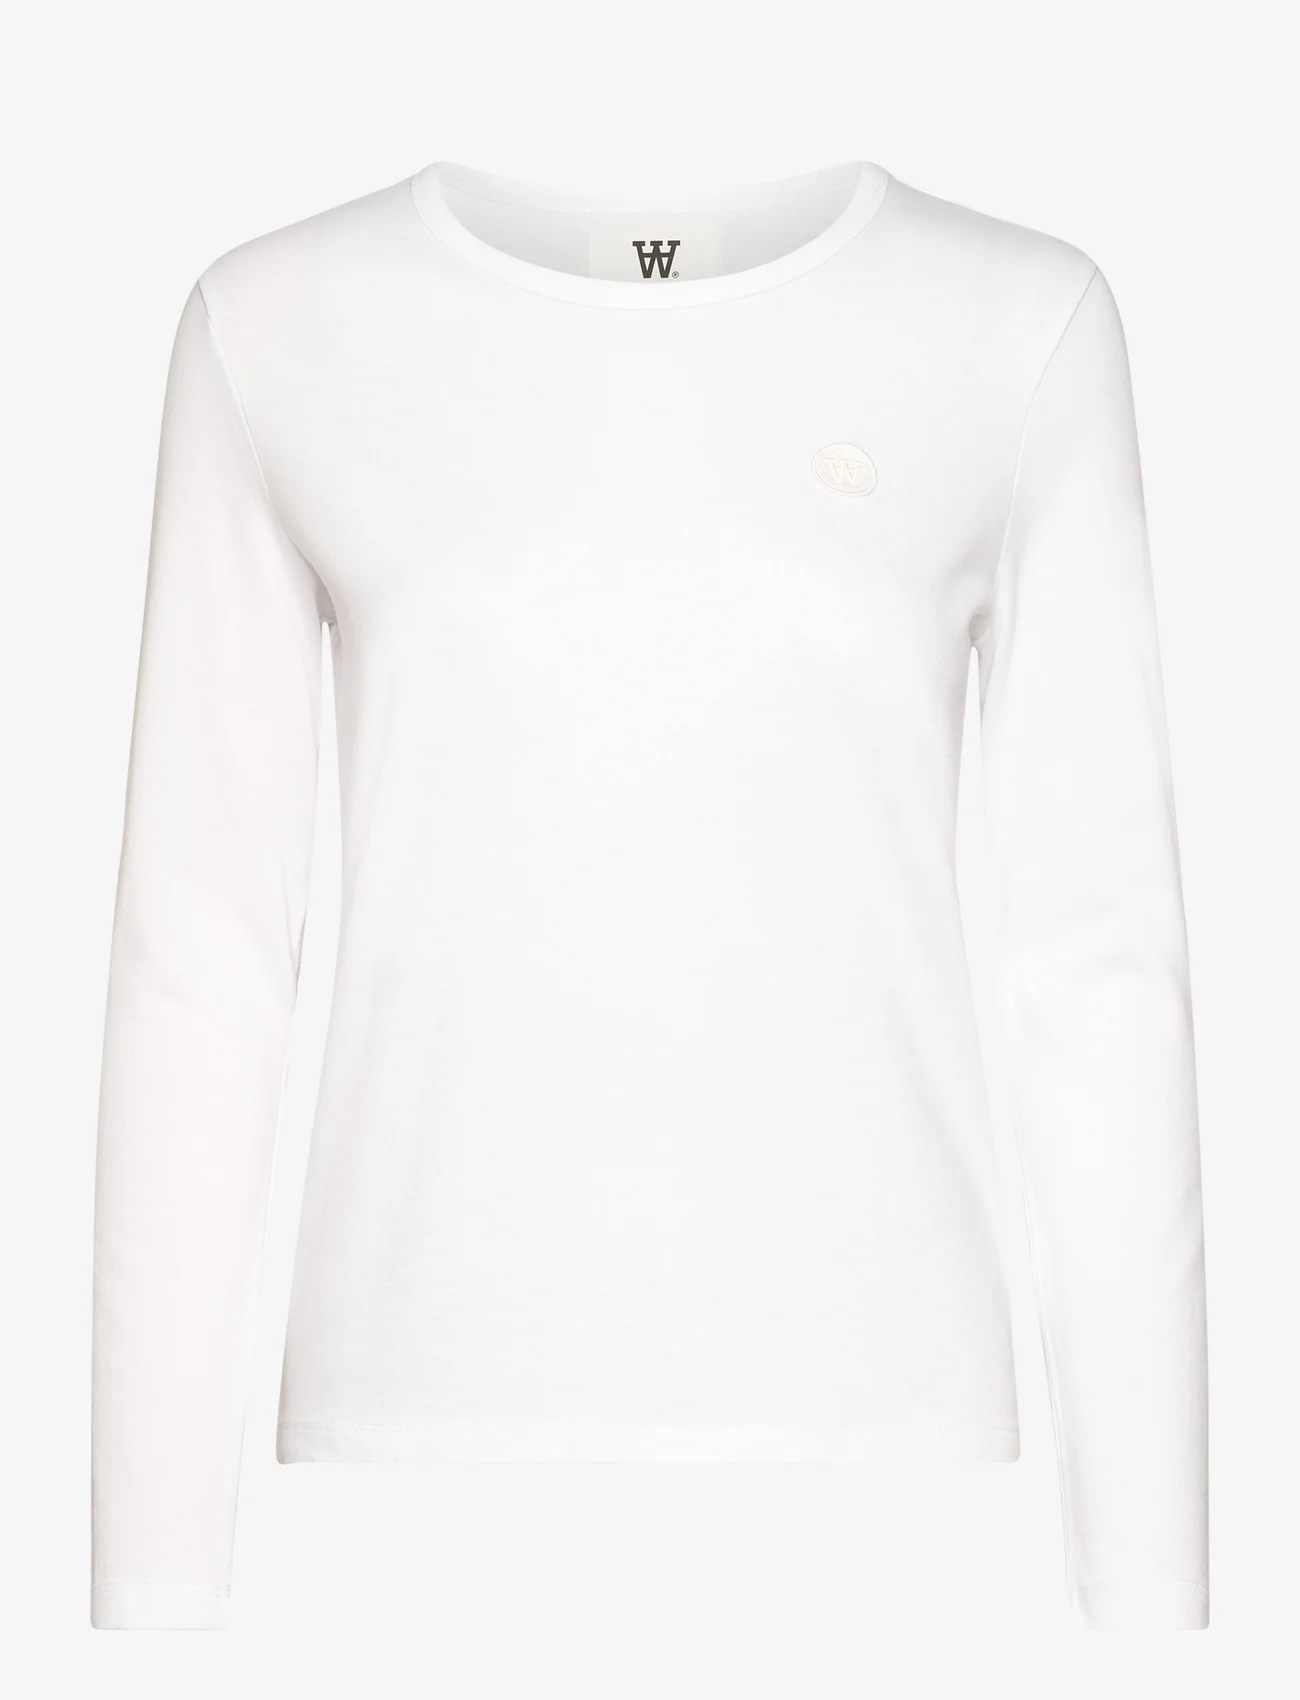 Double A by Wood Wood - Moa long sleeve GOTS - t-shirts & tops - white/white - 0